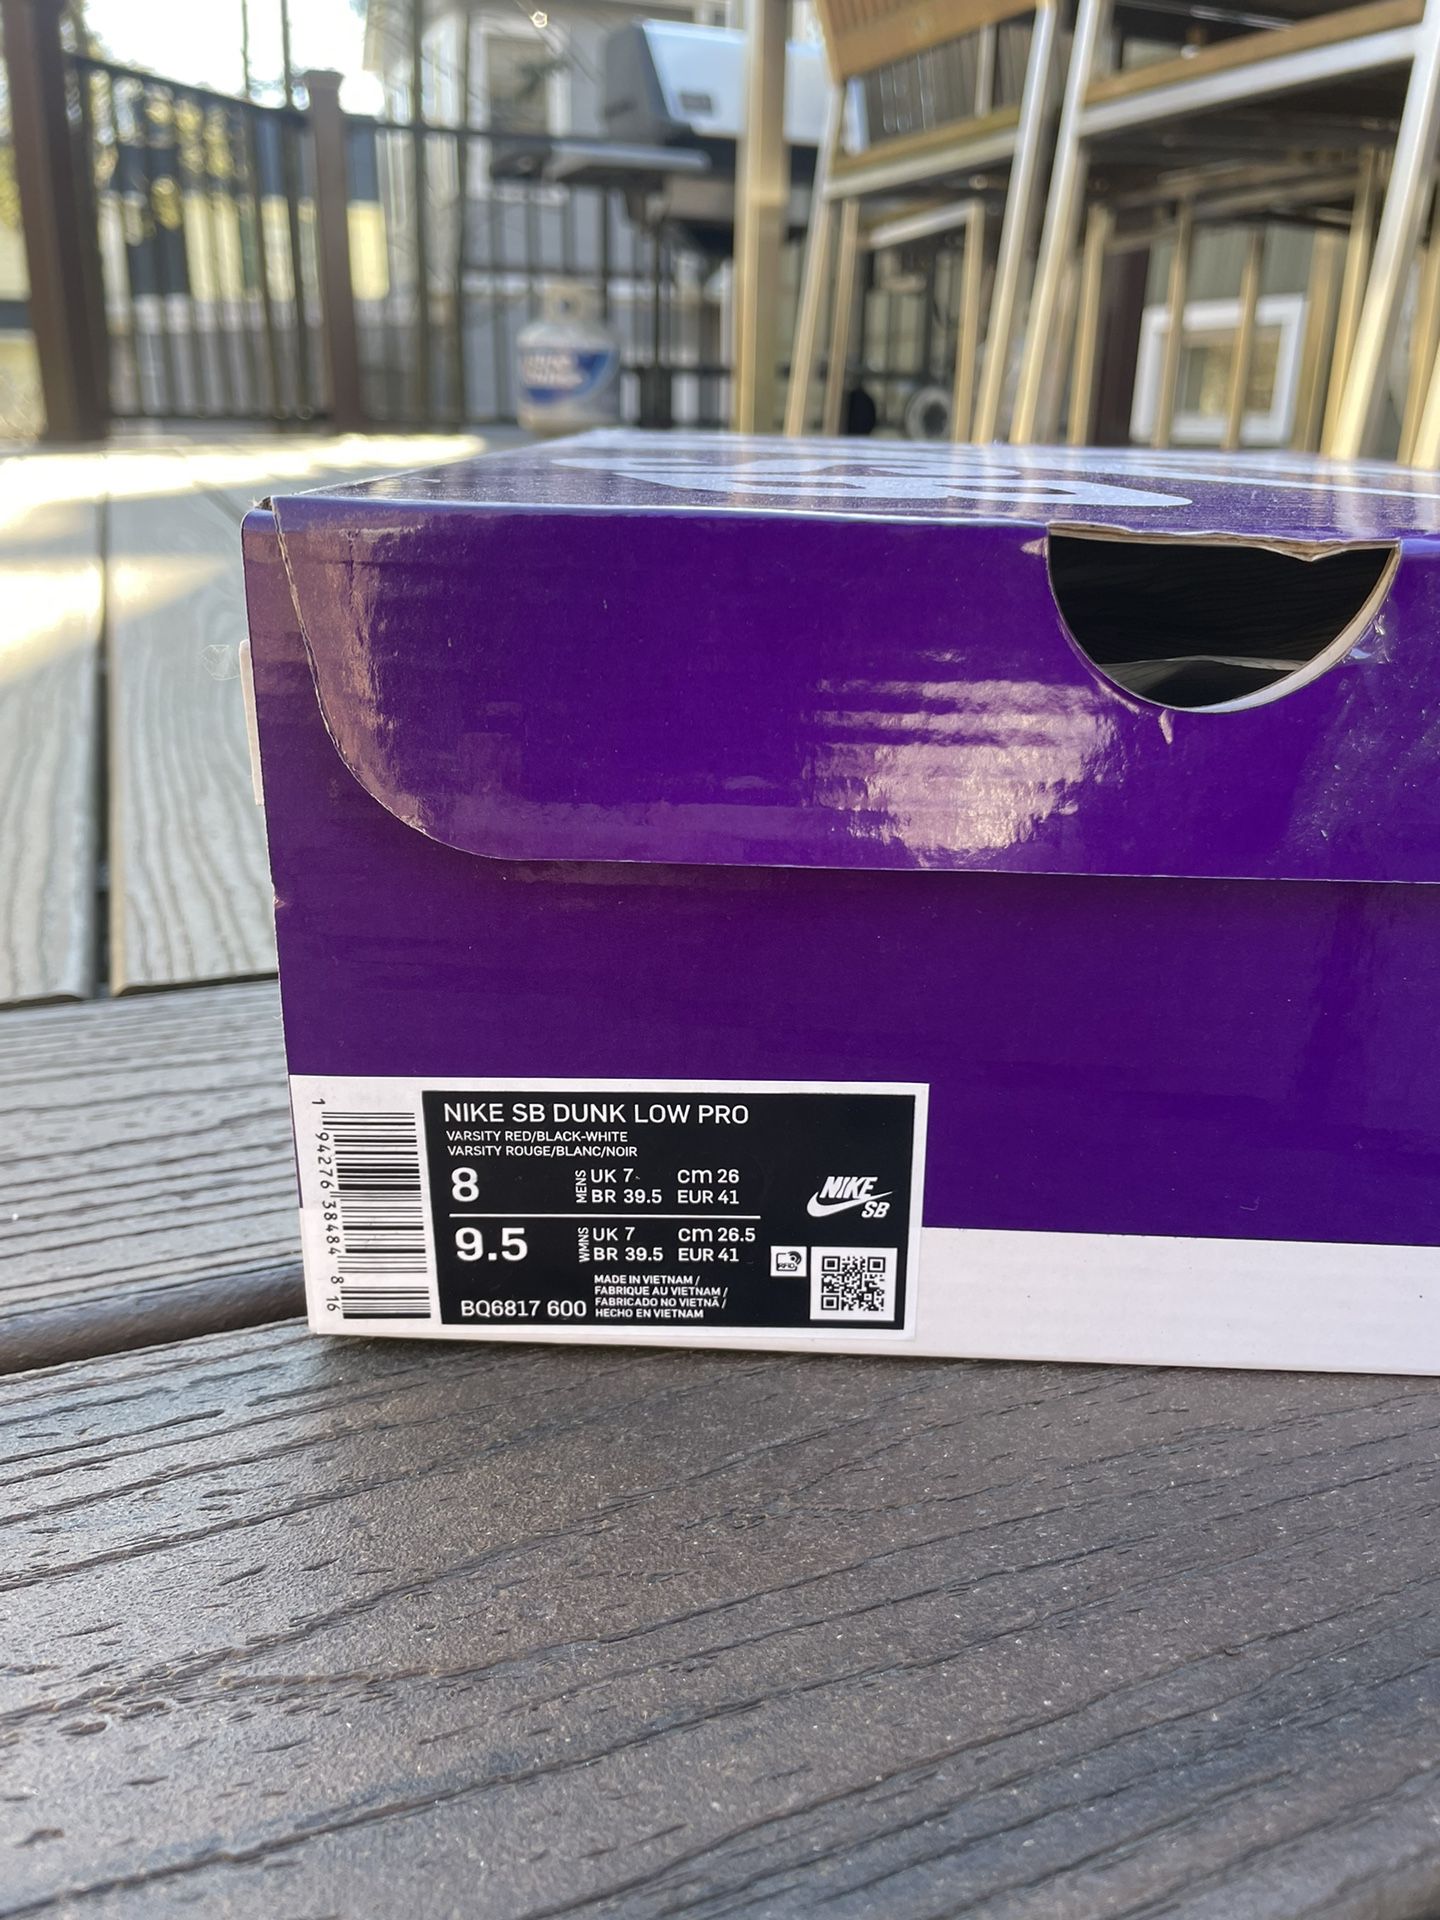 Nike Dunk Low EMB Chicago ️ for Sale in Huntington Park, CA - OfferUp